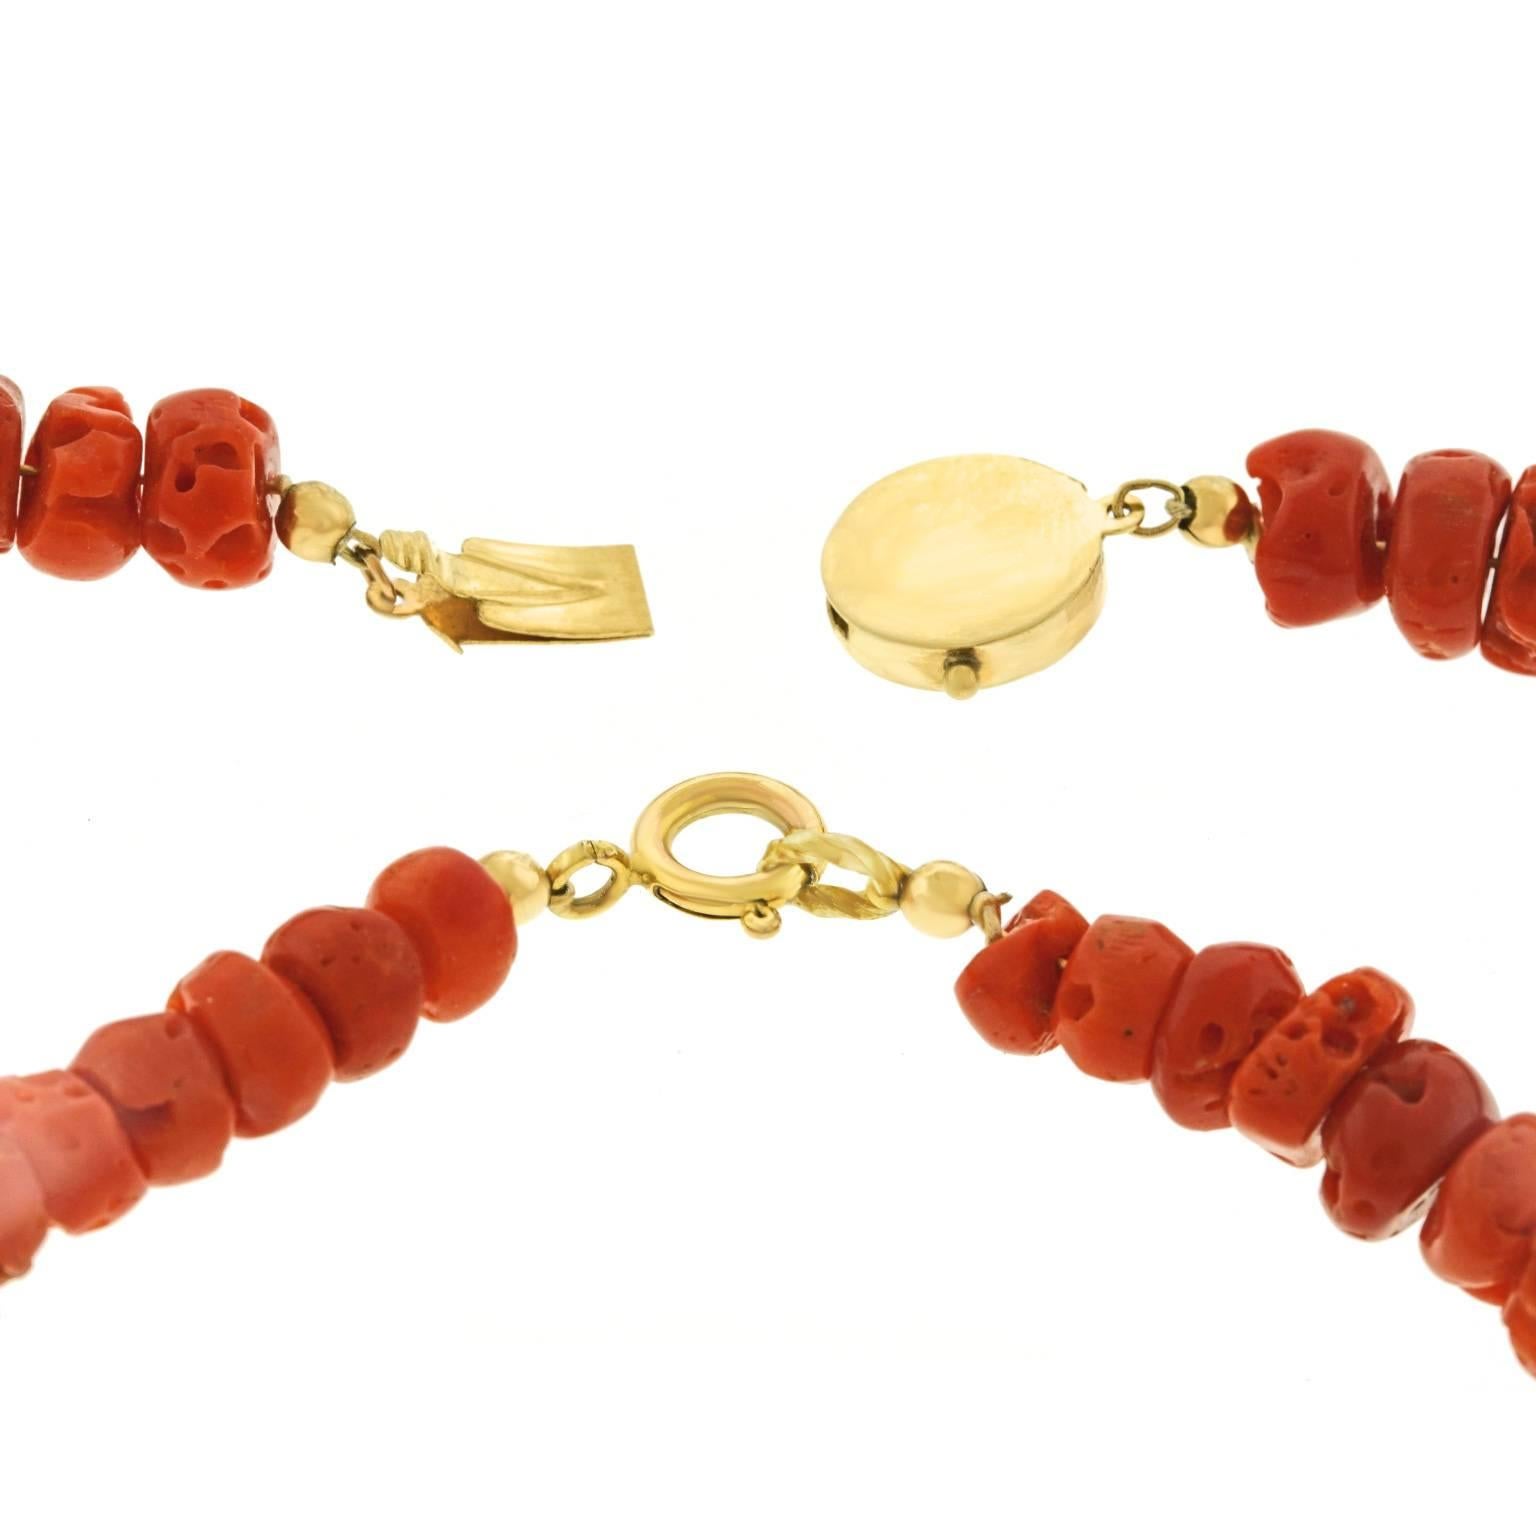 Organo-Chic Coral Necklace and Bracelet 1